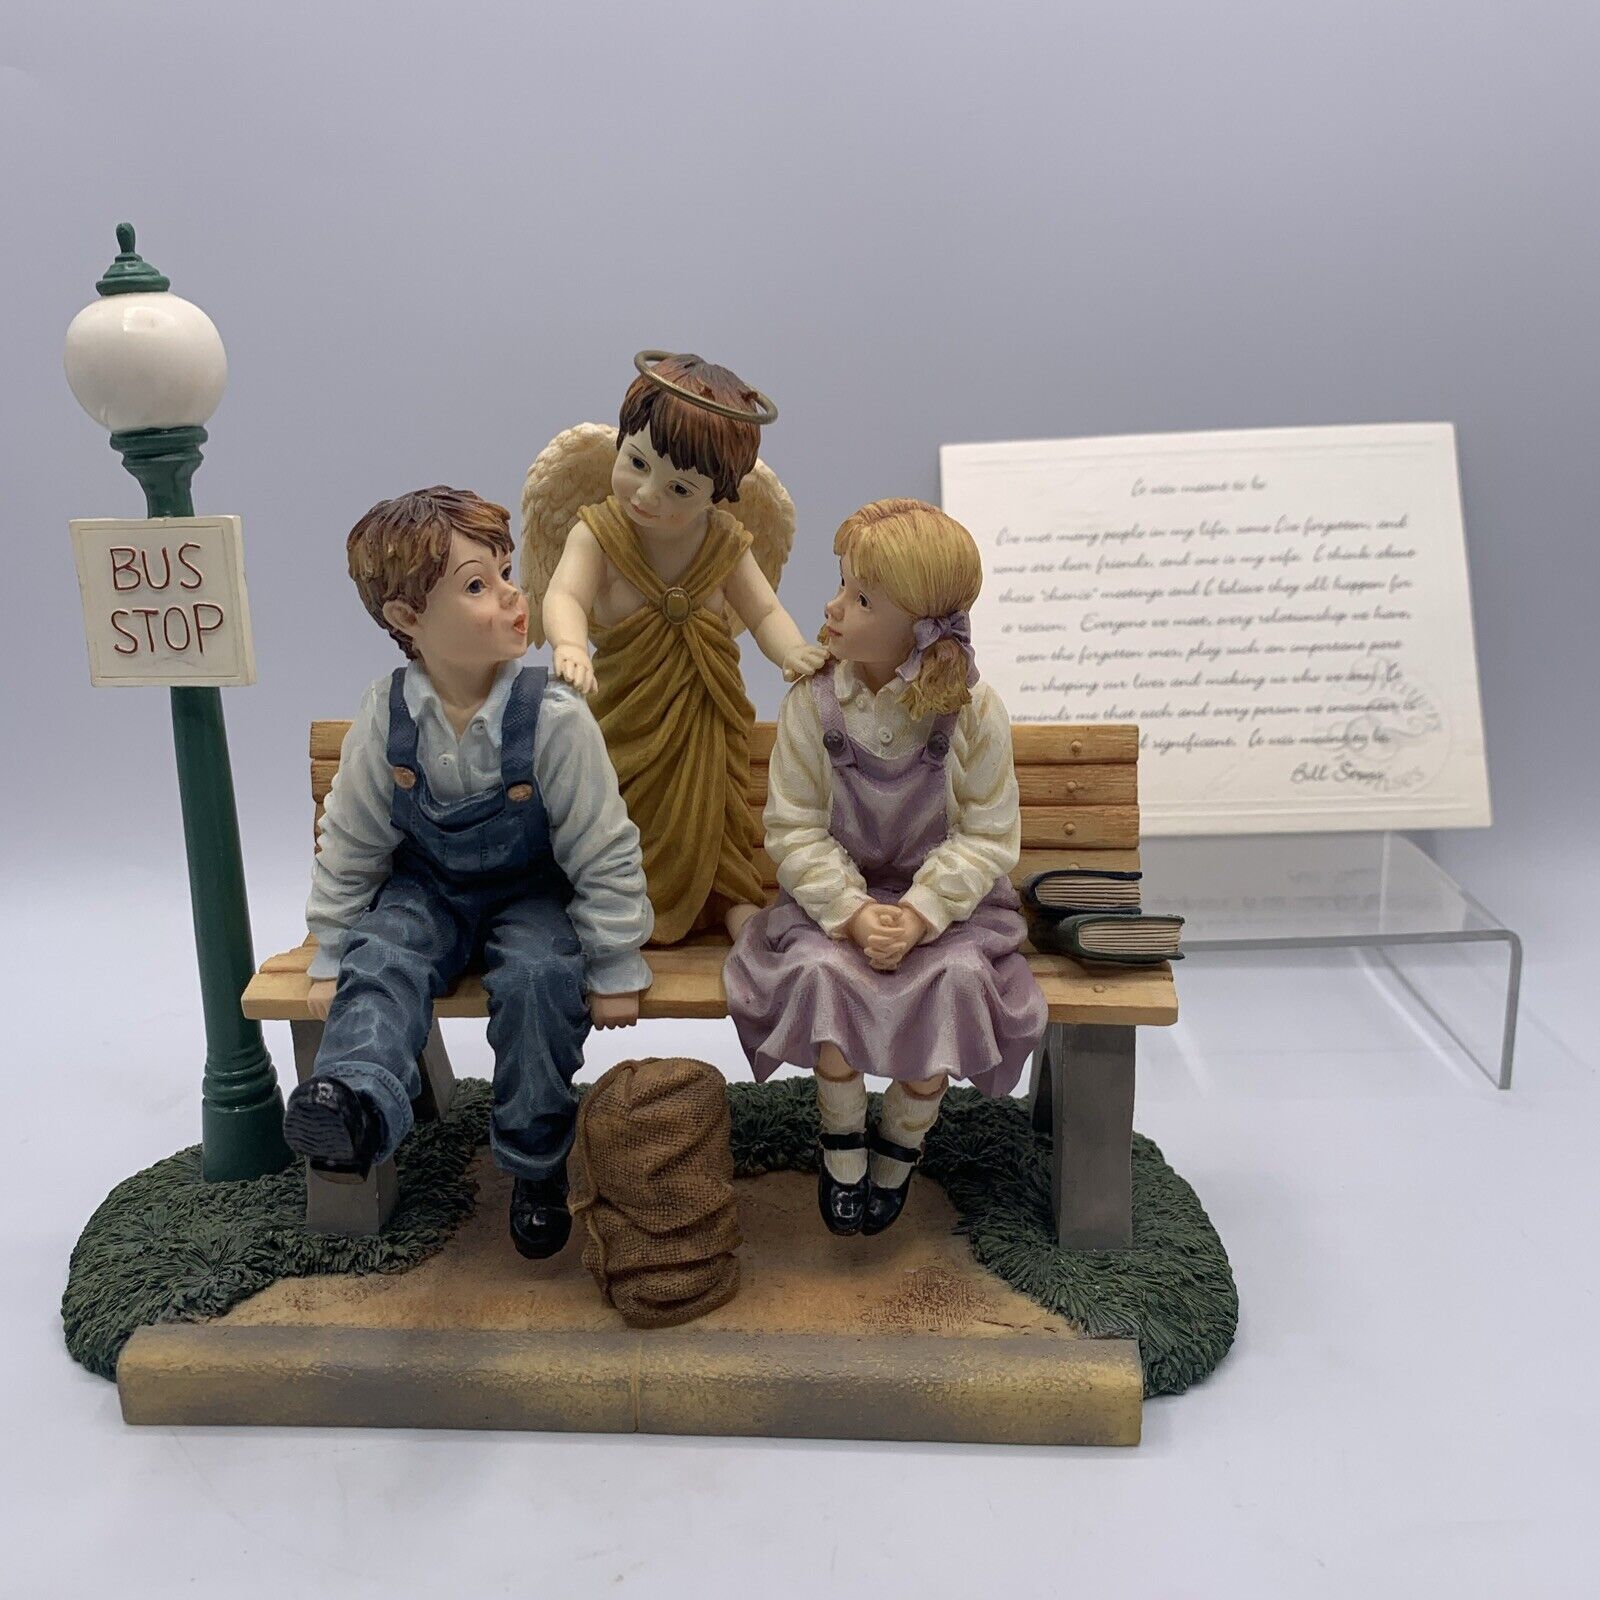 Demdaco Prayers & Promises Figurine 2002 “It Was Meant To Be” By Bill Stross